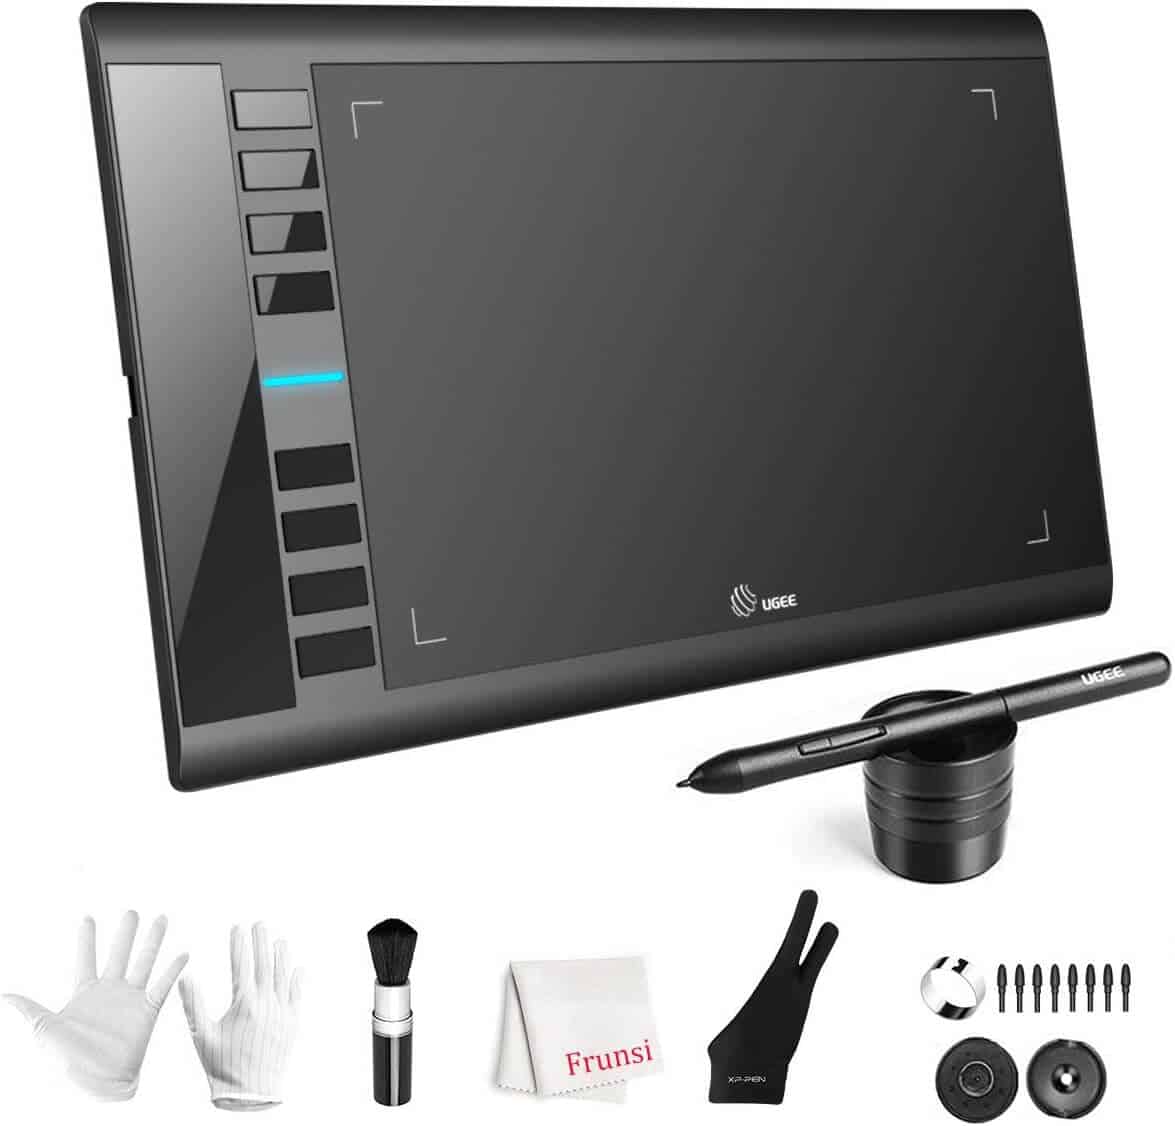 Graphic tablet for teens that's affordable and well made. It has everhything they need for digital art